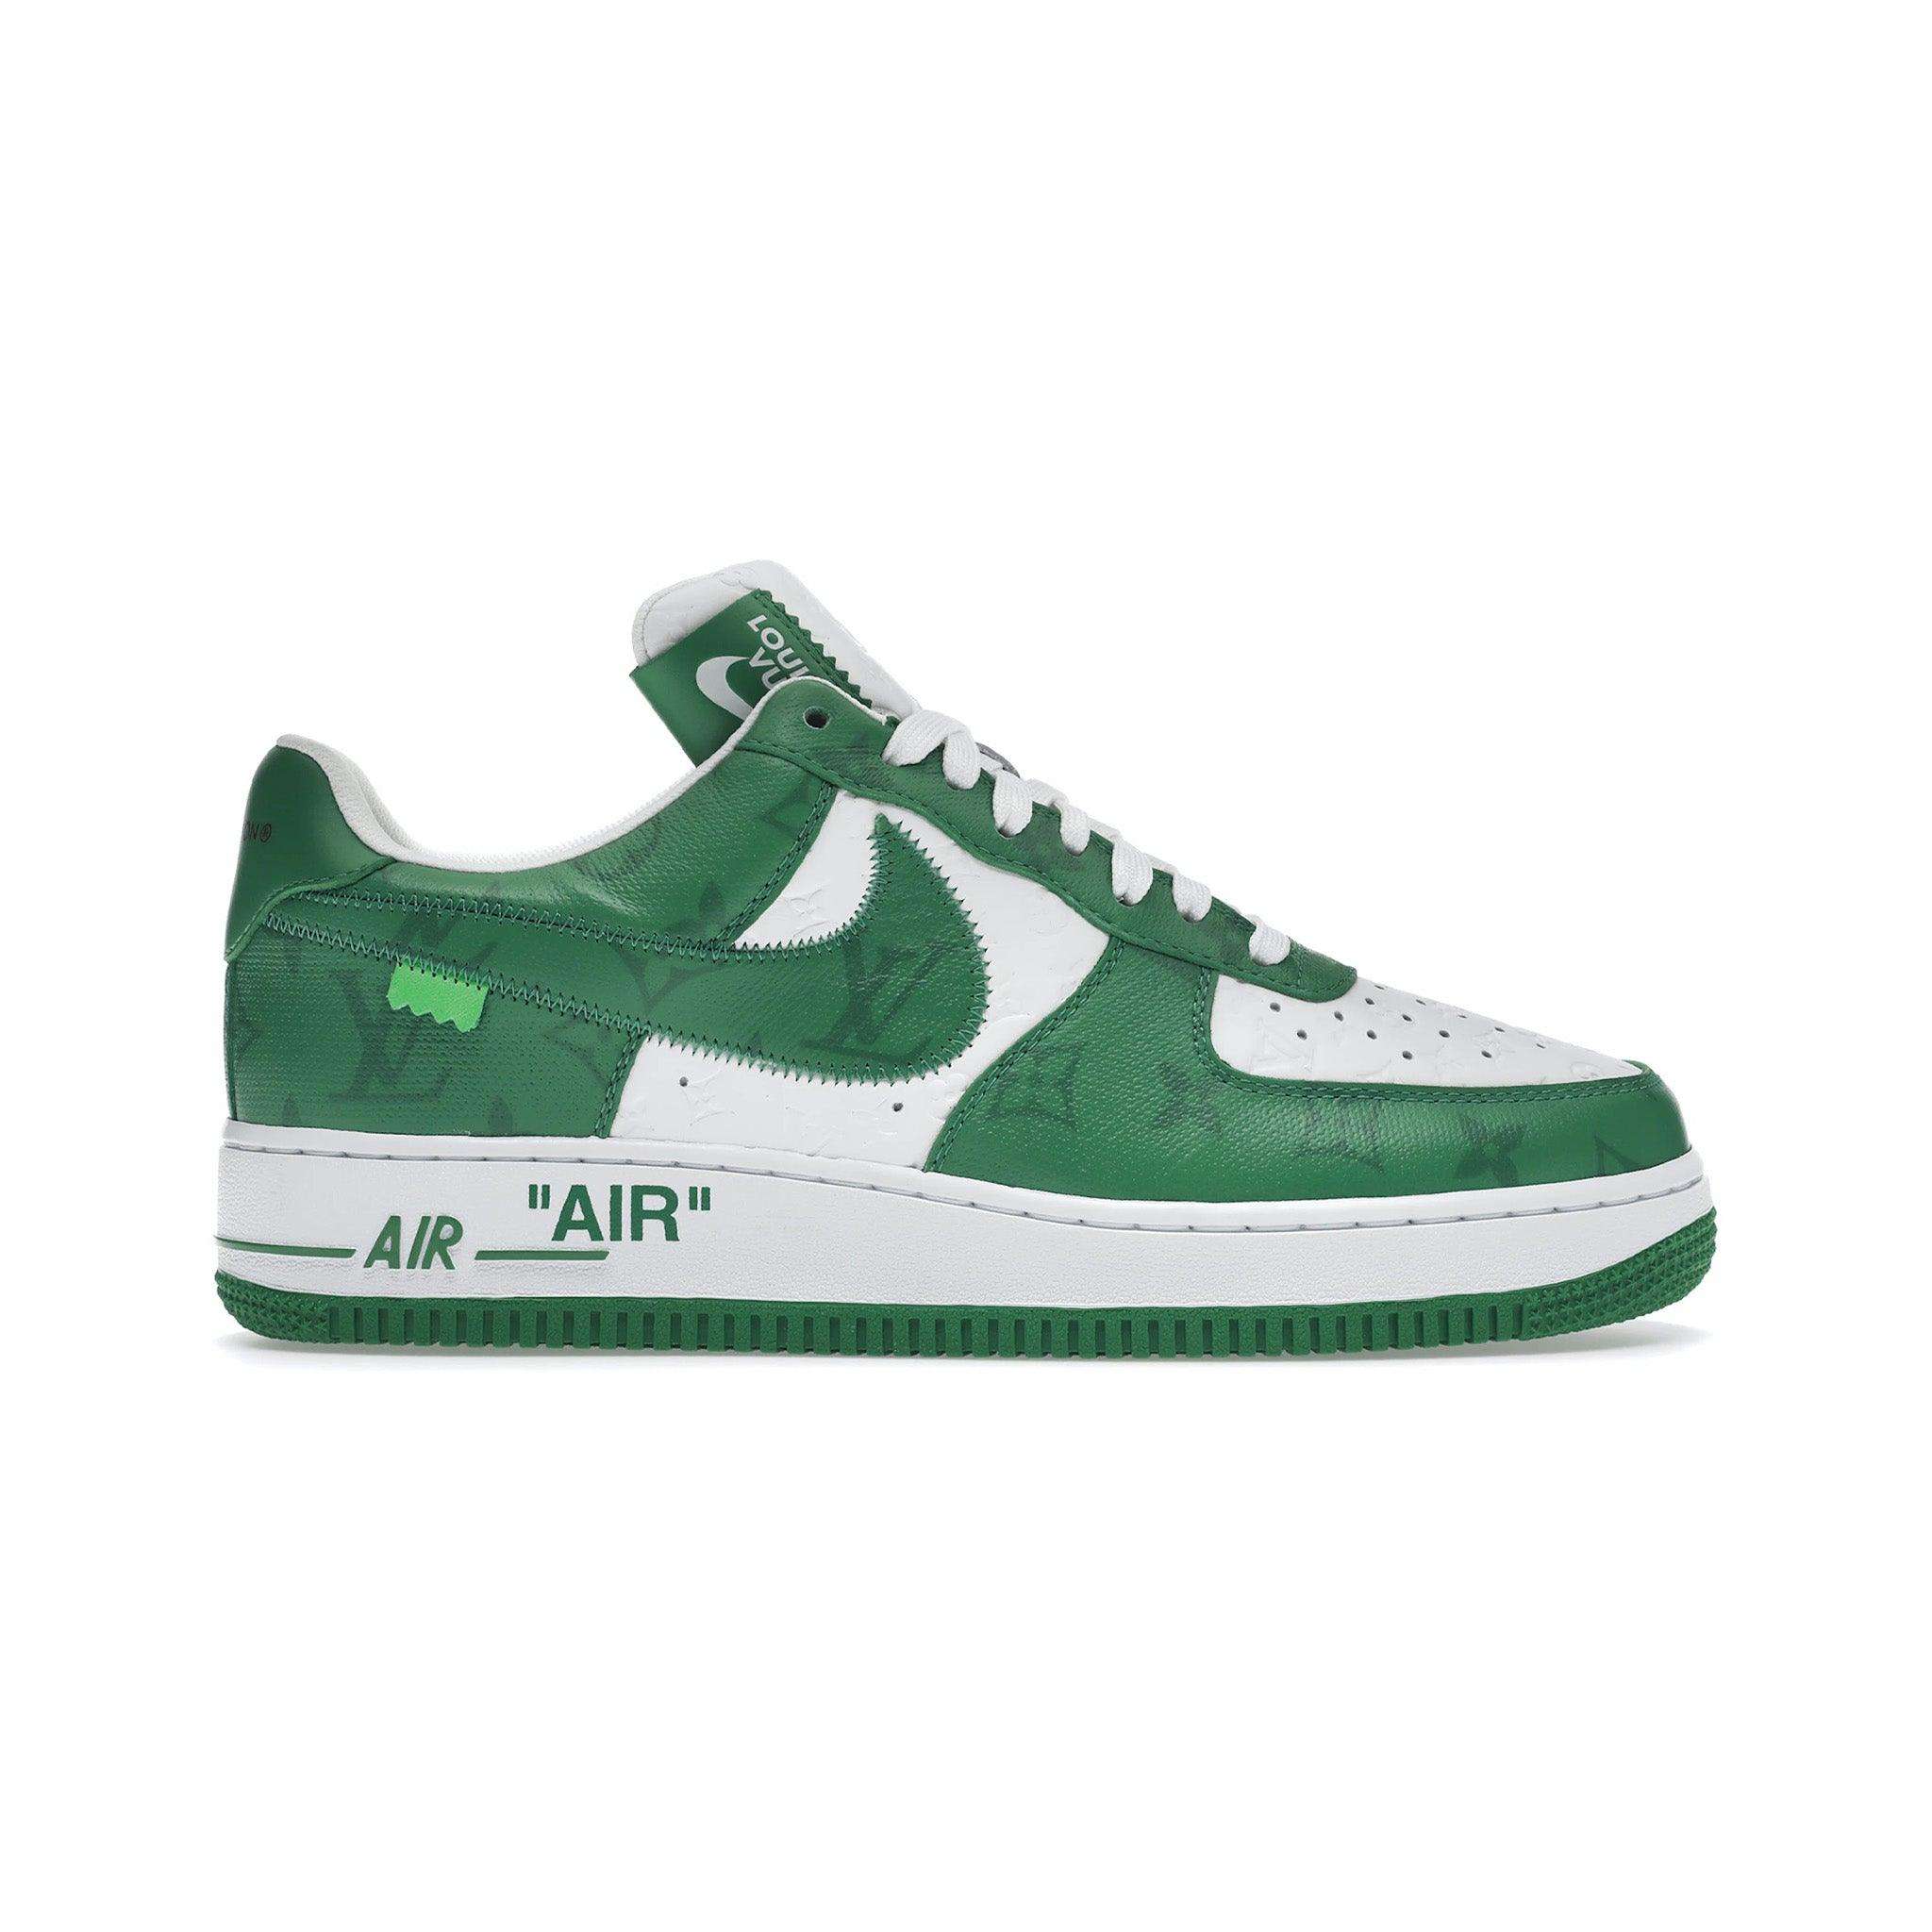 GOAT to Auction Off Dior Jordan 1s, Louis Vuitton x Nike Air Force 1 Lows &  More on Black Friday